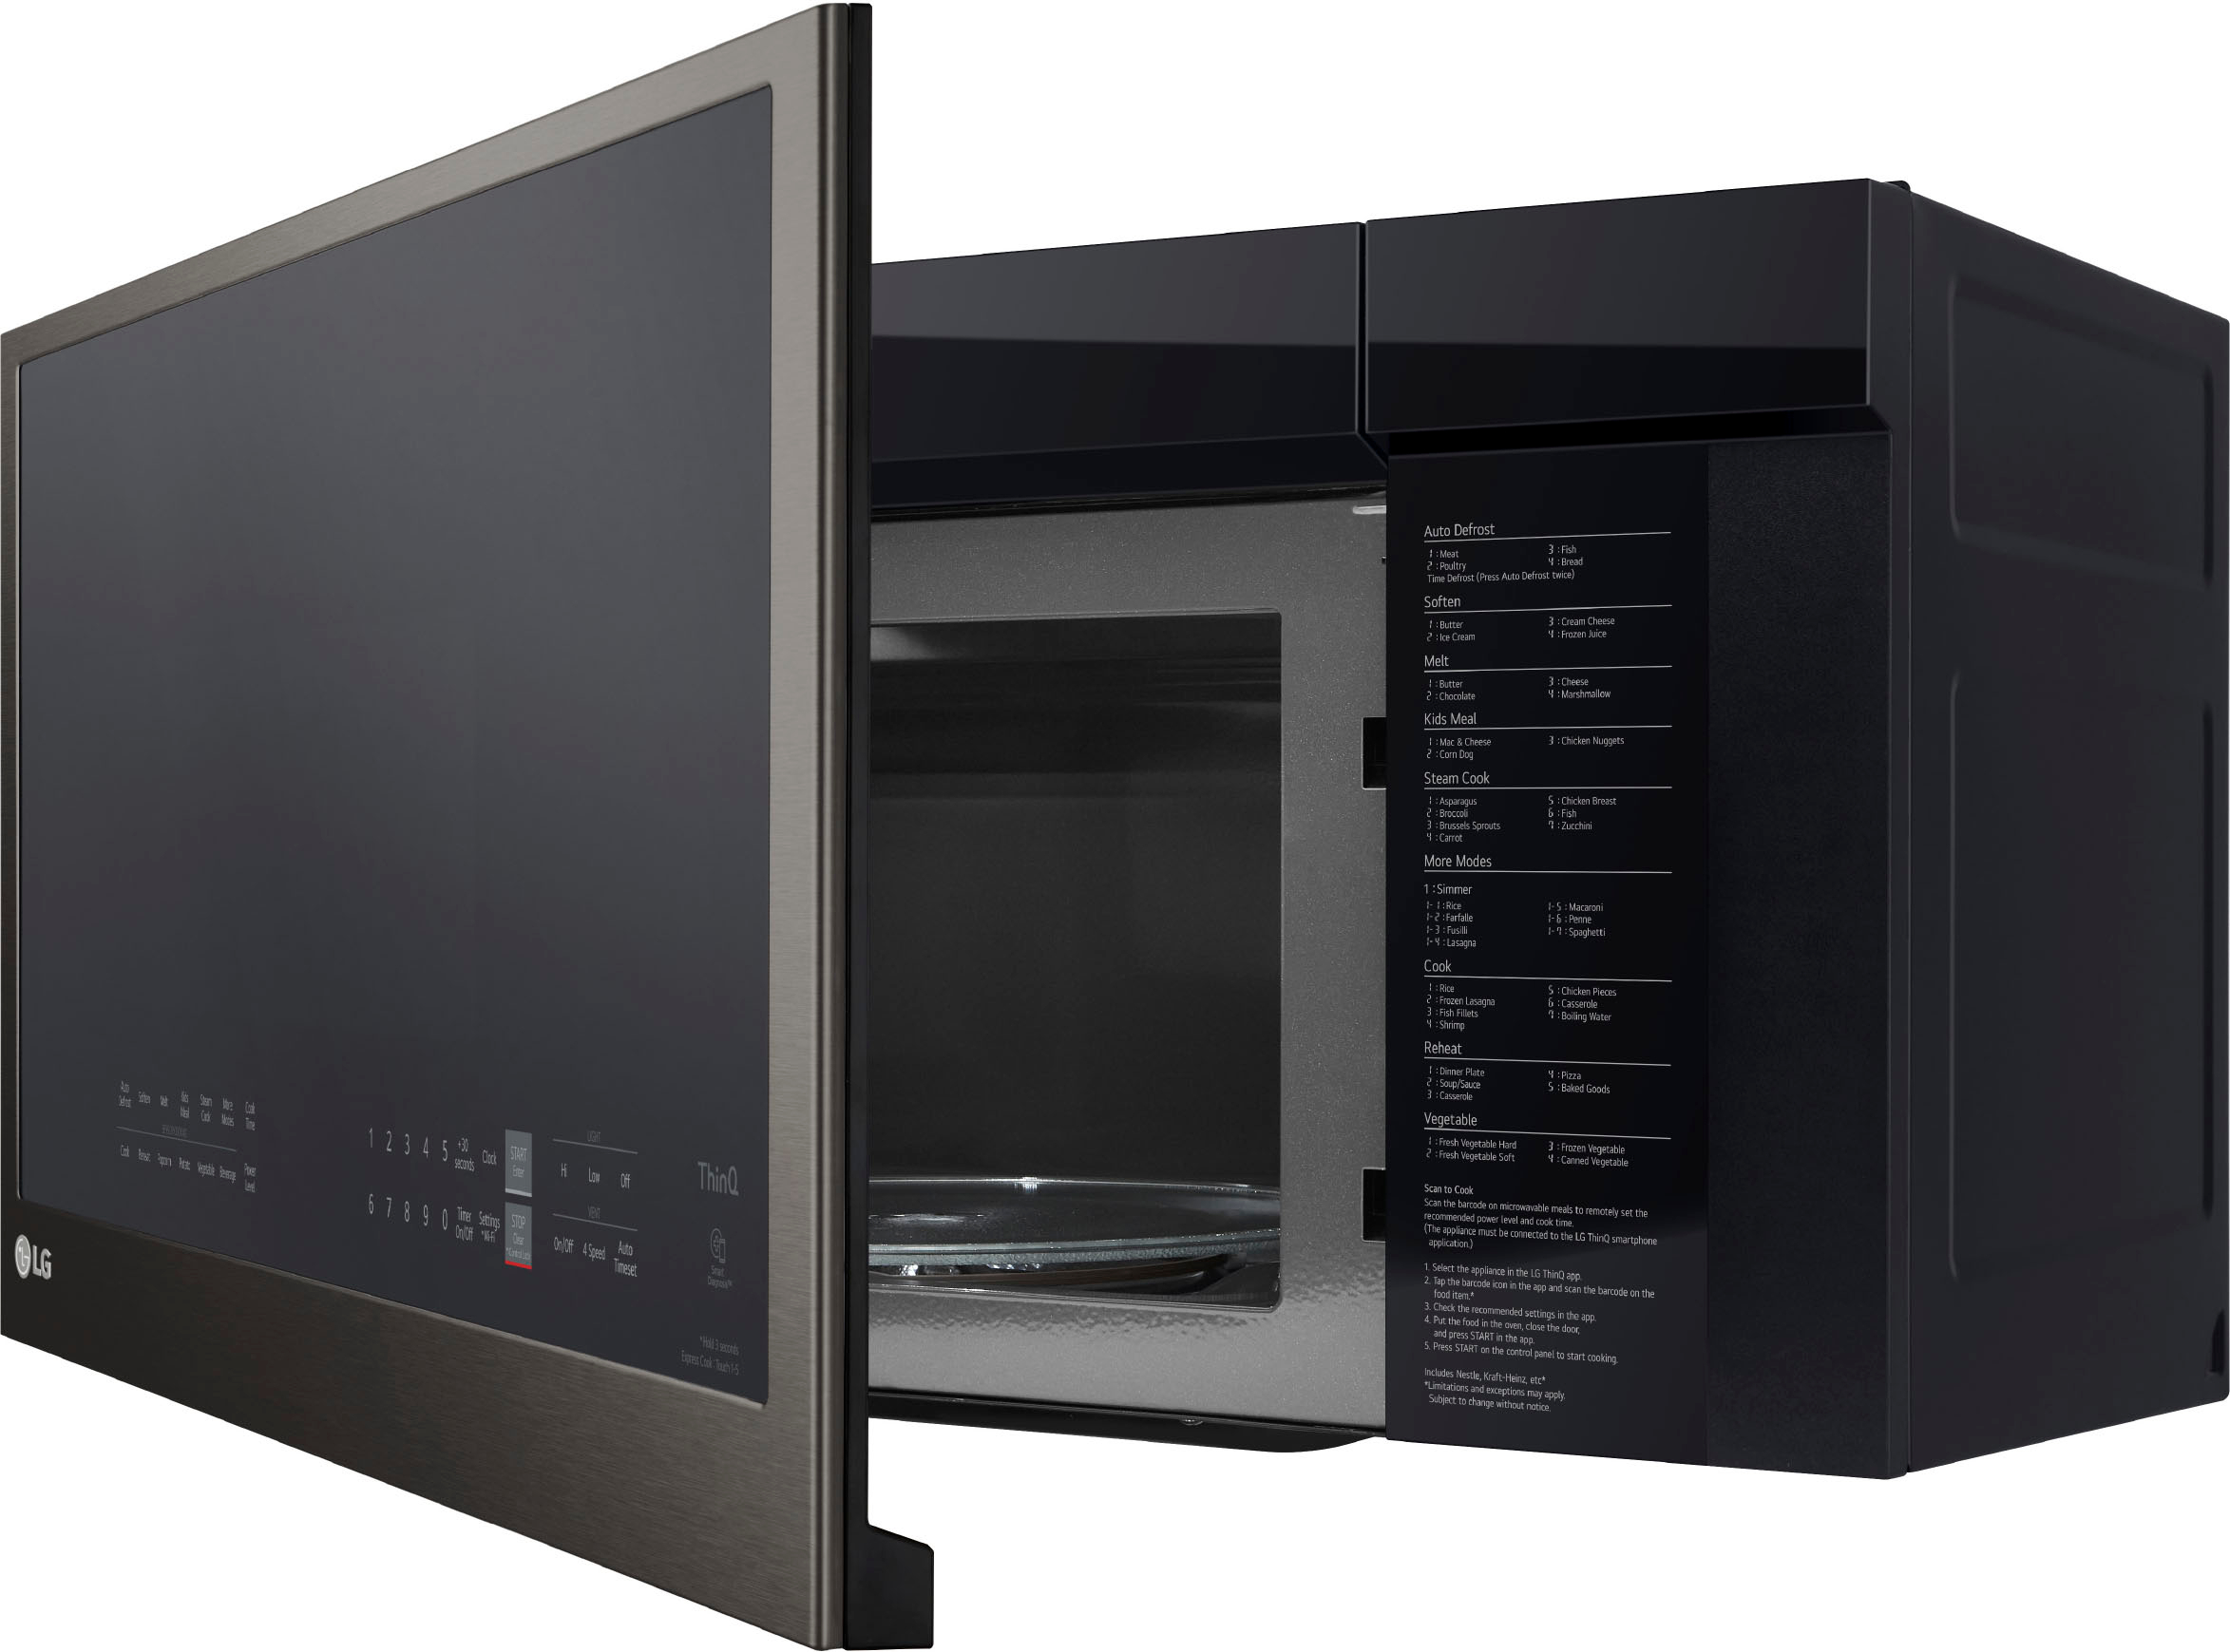 LG - NeoChef 1.5 Cu. ft. Countertop Microwave with Sensor Cooking and Easyclean - Black Stainless Steel